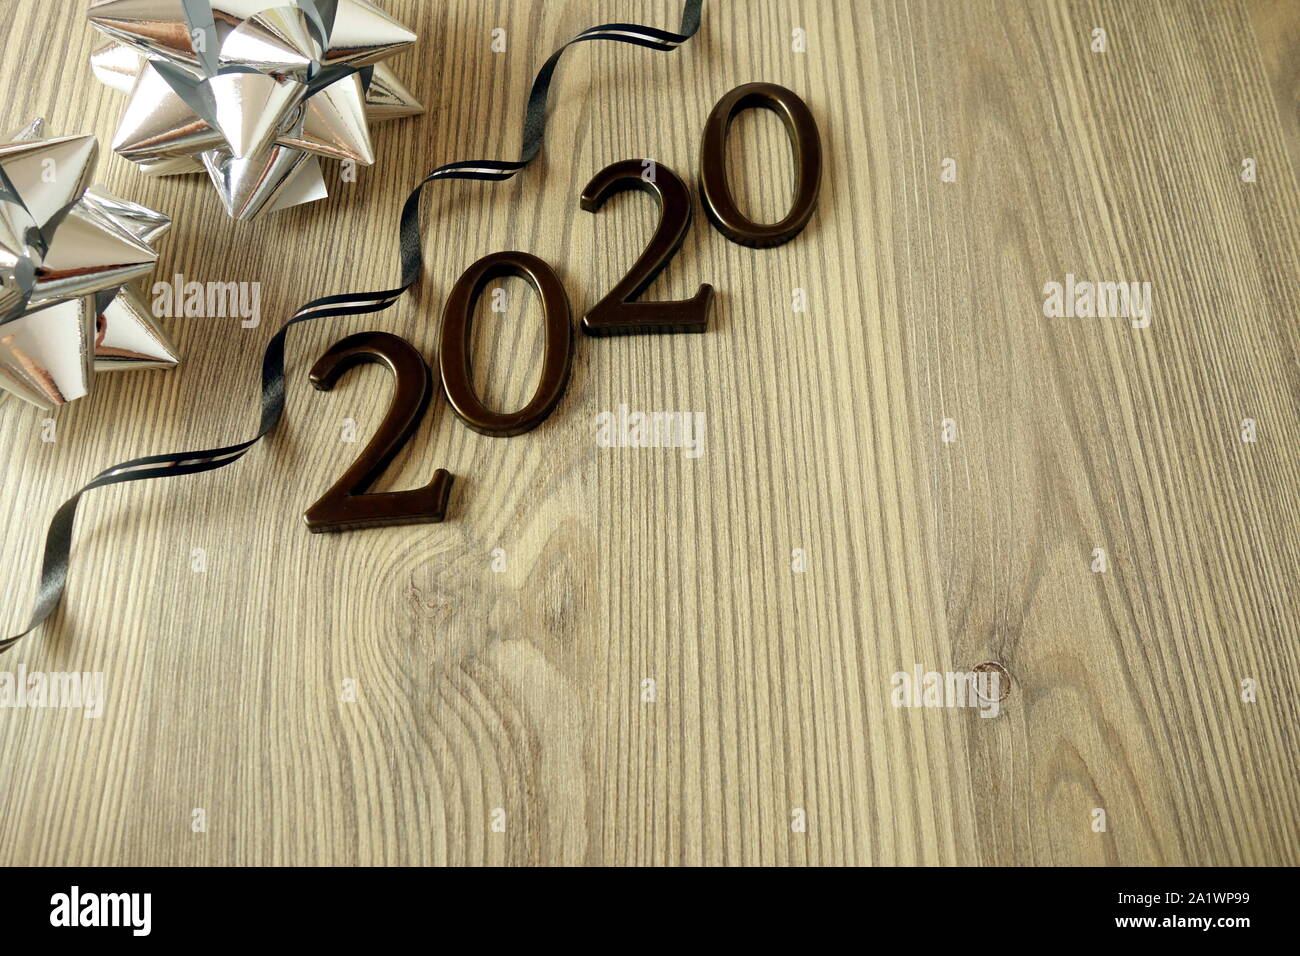 New Year 2020 greeting card or party invitation background concept Stock Photo